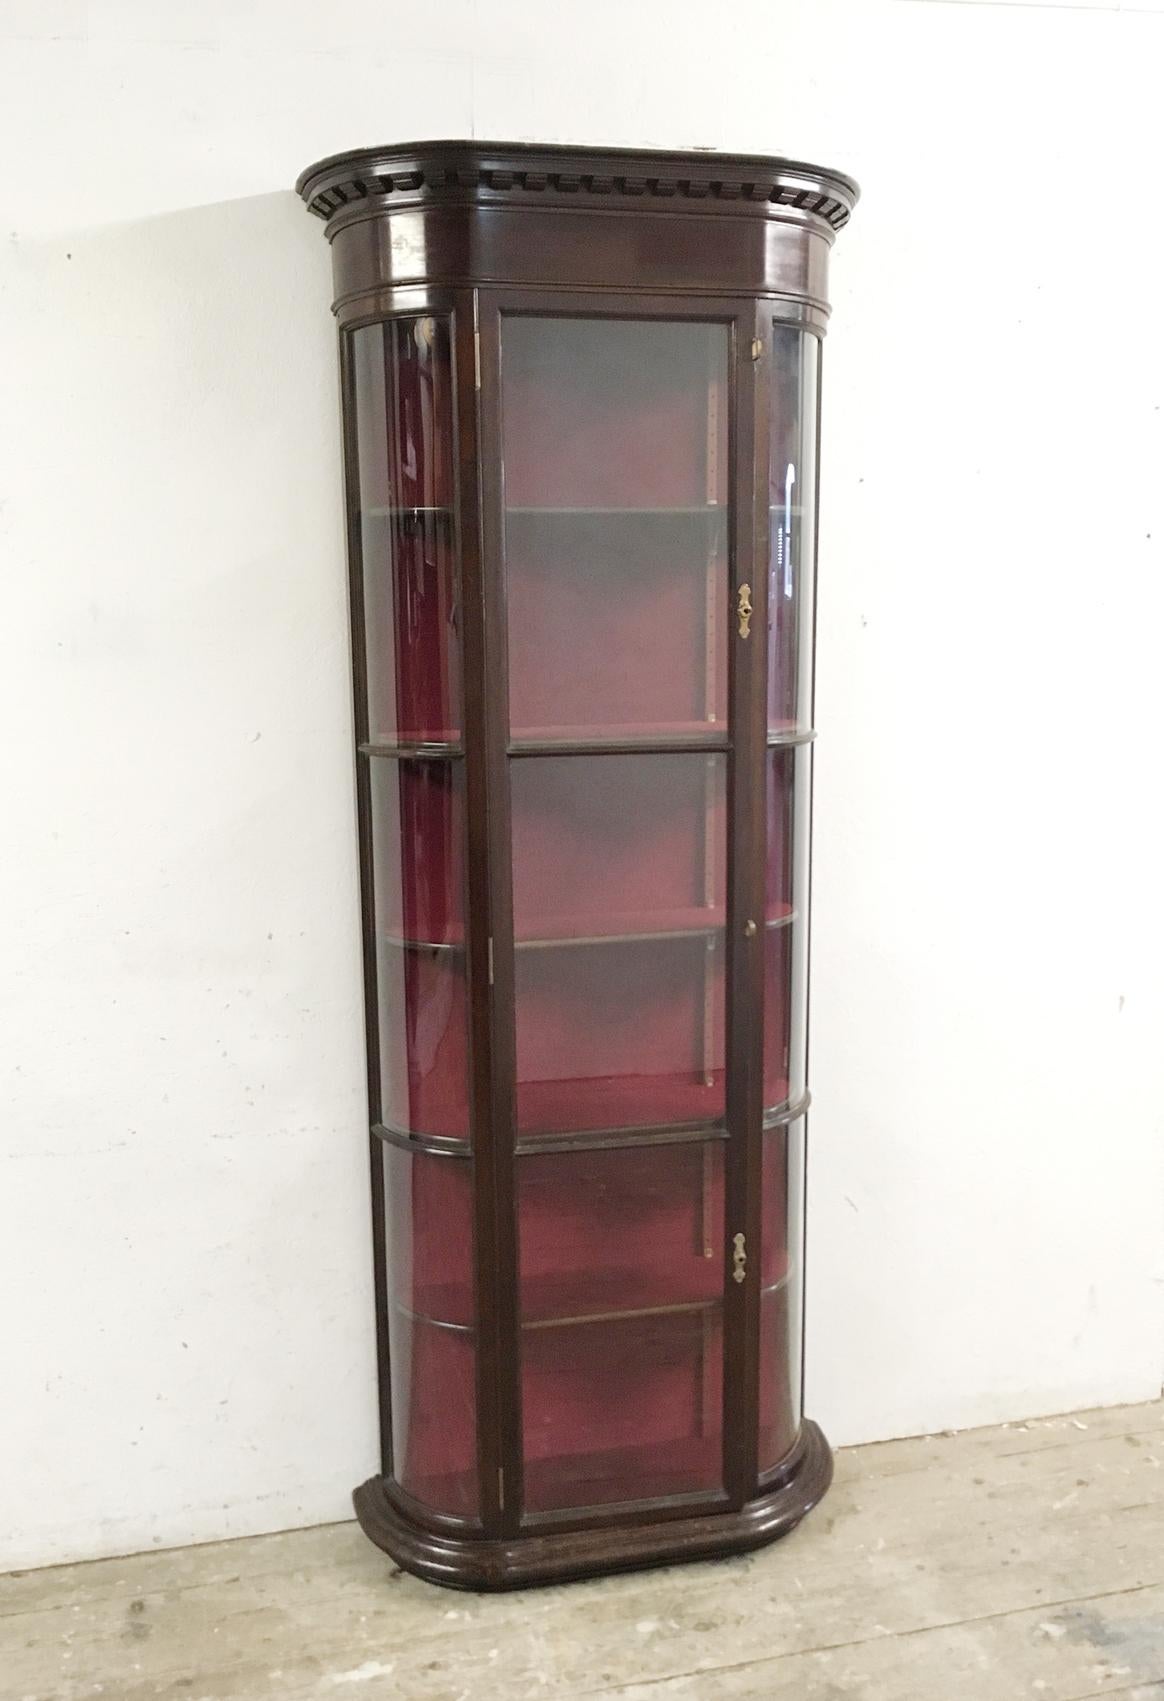 Bow fronted curved glass Victorian display cabinet
English 
Victorian
Mahogany
circa 1890s-1900s
Fully lined with red velvet
Adjustable velvet covered mahogany shelves, there are 5 shelves plus the bottom of the cabinet 
Bow front sides